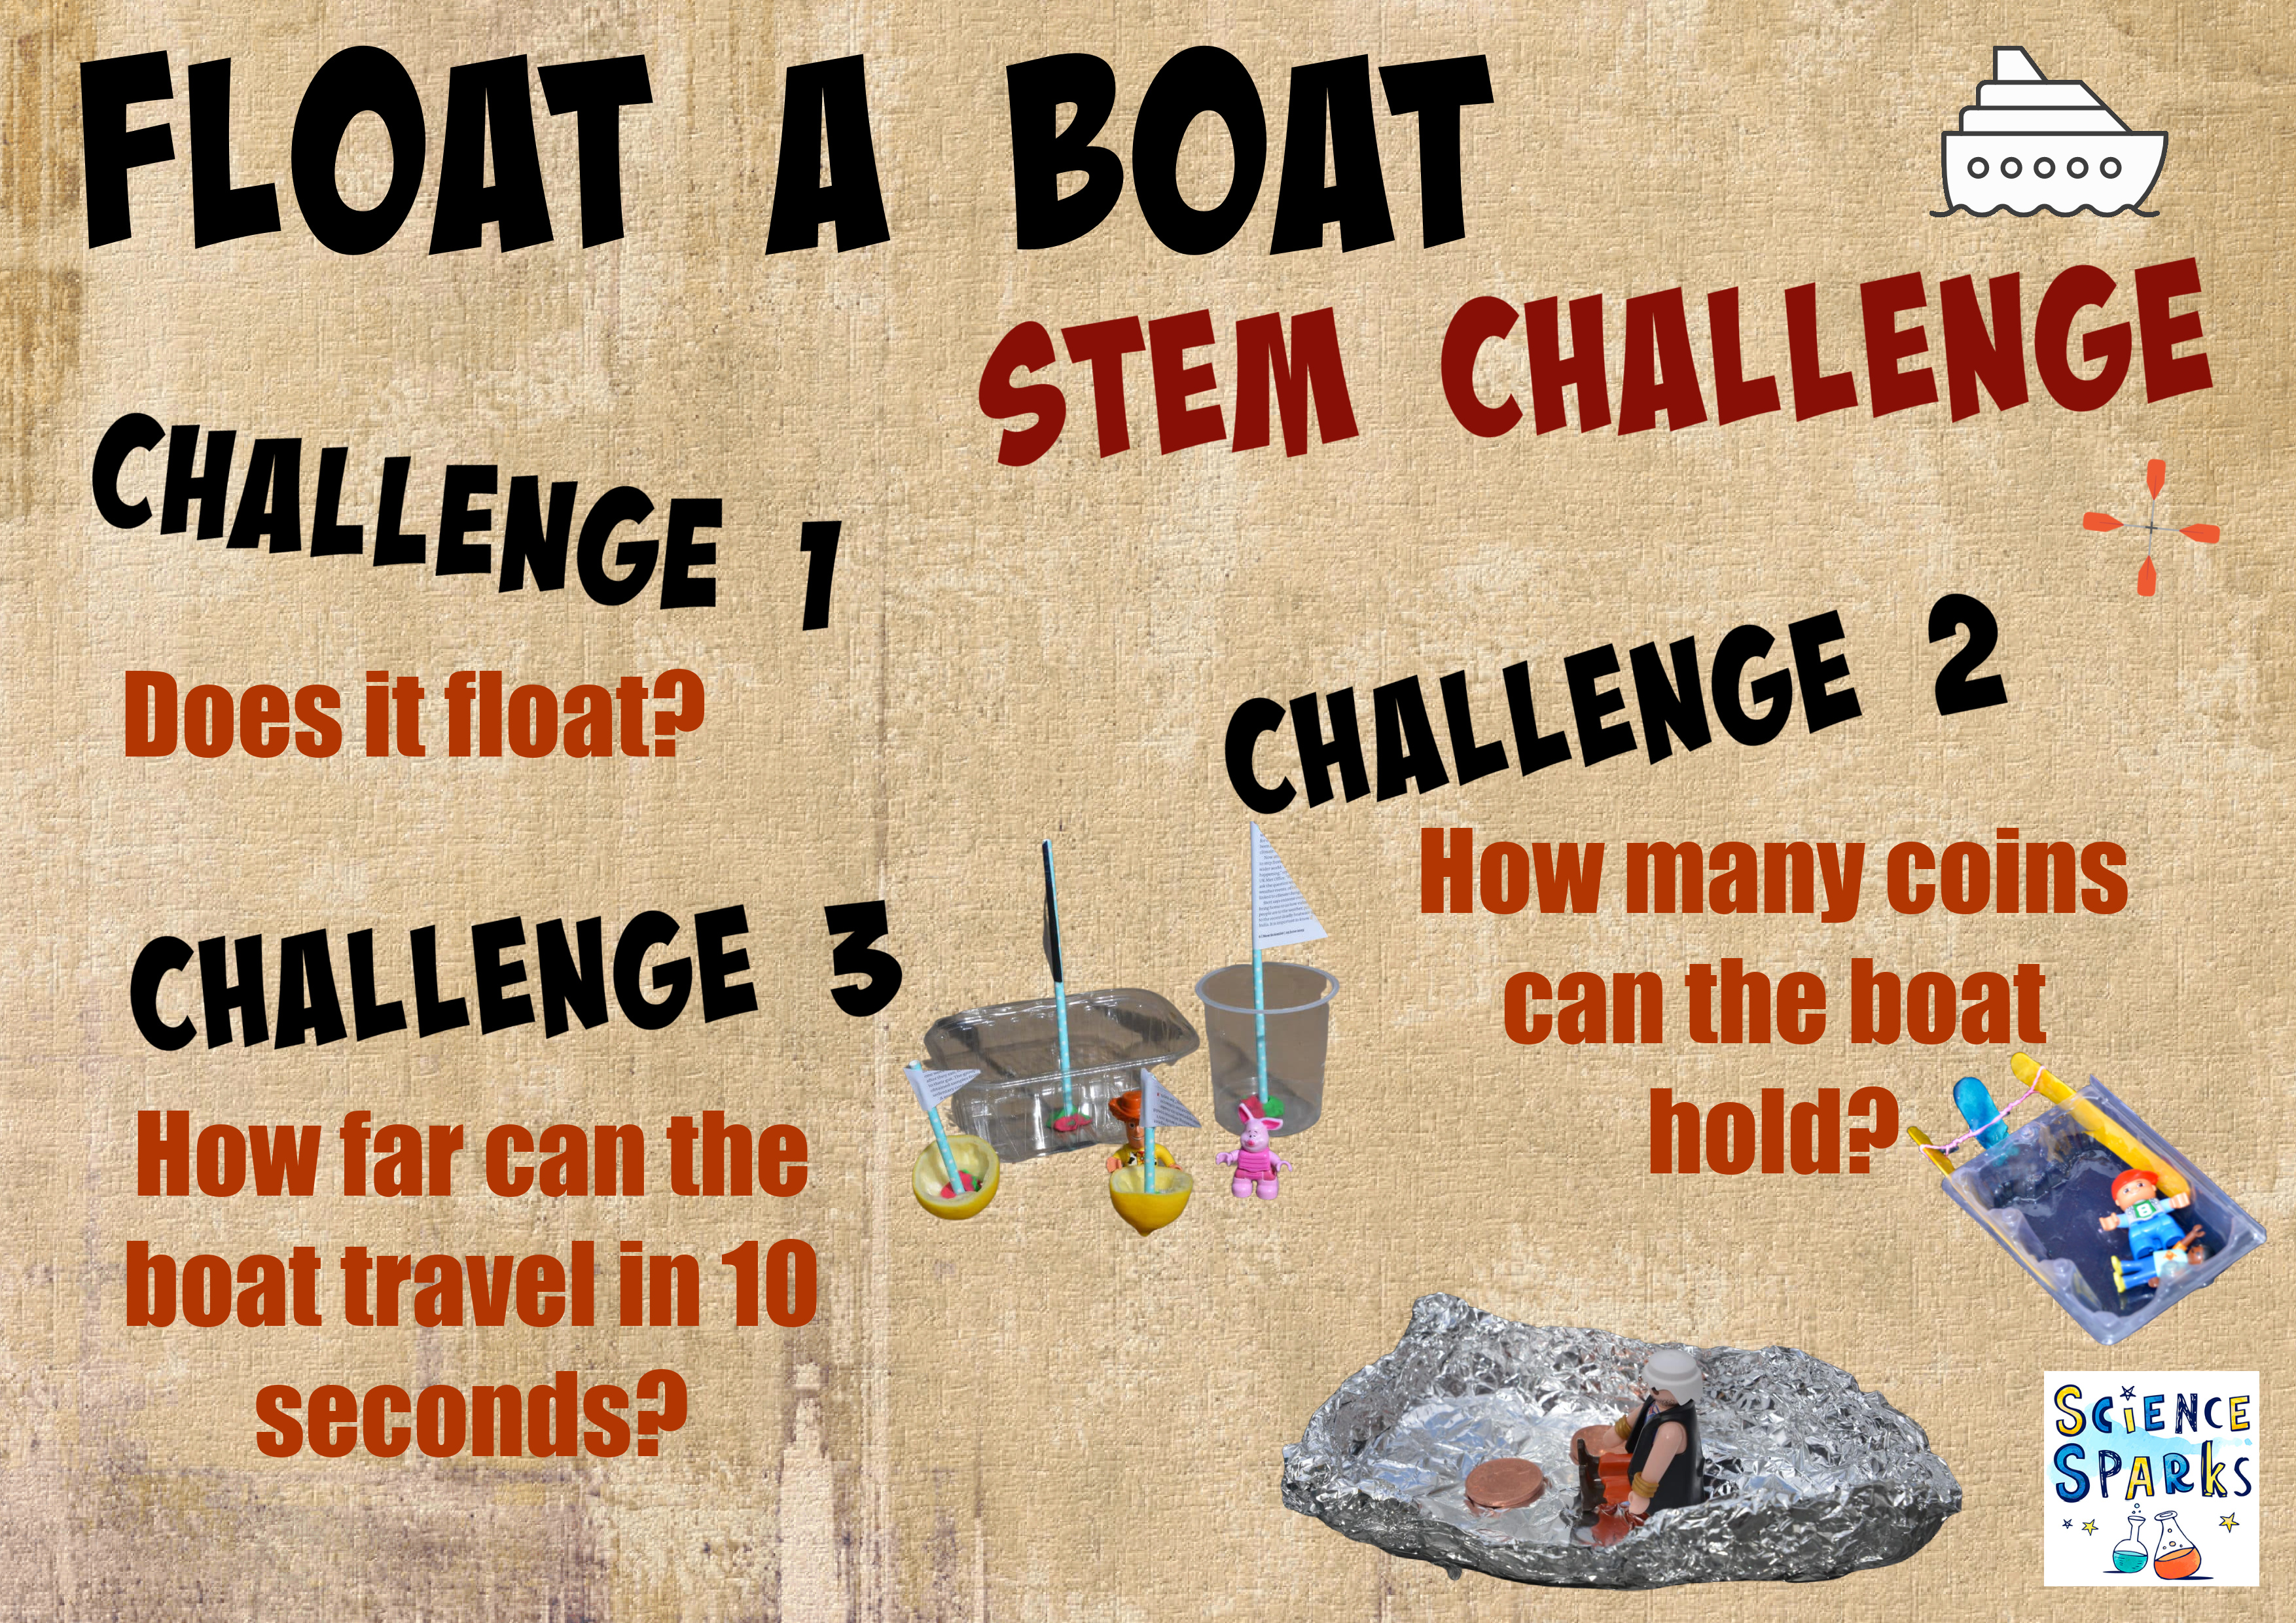 FLOAT A boat STEM challenge infographic showing three different challenges for a boat themed STEM activity